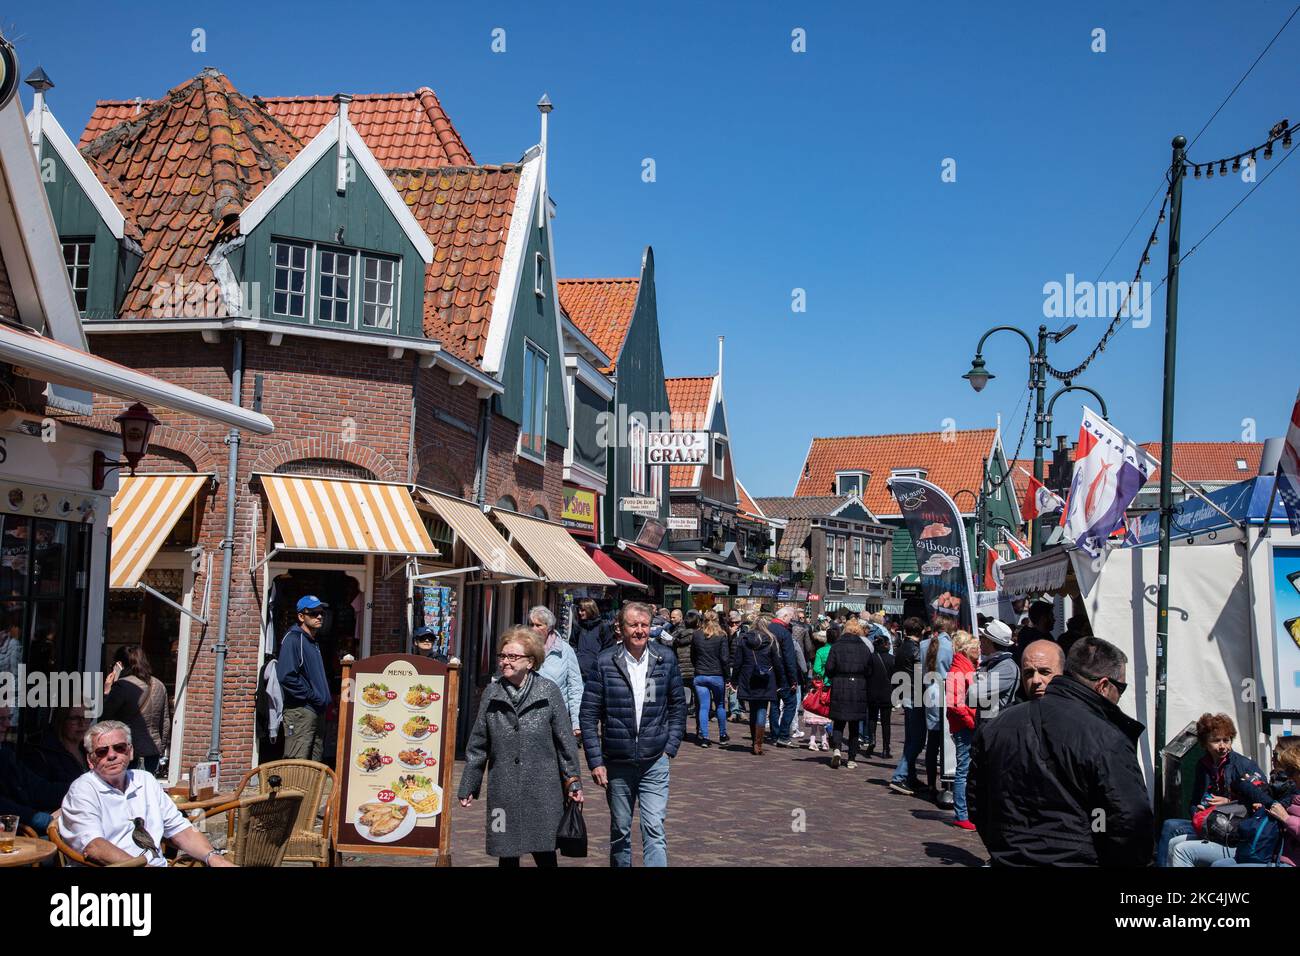 Daily life in Volendam traditional fishing village with Dutch architecture in North Holland near Amsterdam in The Netherlands. Volendam has a harbor and is a popular destination and tourist attraction in the country. There are old fishing boats, traditional clothing of locals, ferry ride to Marken, museums, cheese factroy, cafe and souvenir shops at the waterfront and a little beach. There are houses along the shore and a marina nearby for tourists and locals as visitors so tourism is the main income for the community. Volendam has been featured in many recent movies. Volendam - The Netherland Stock Photo